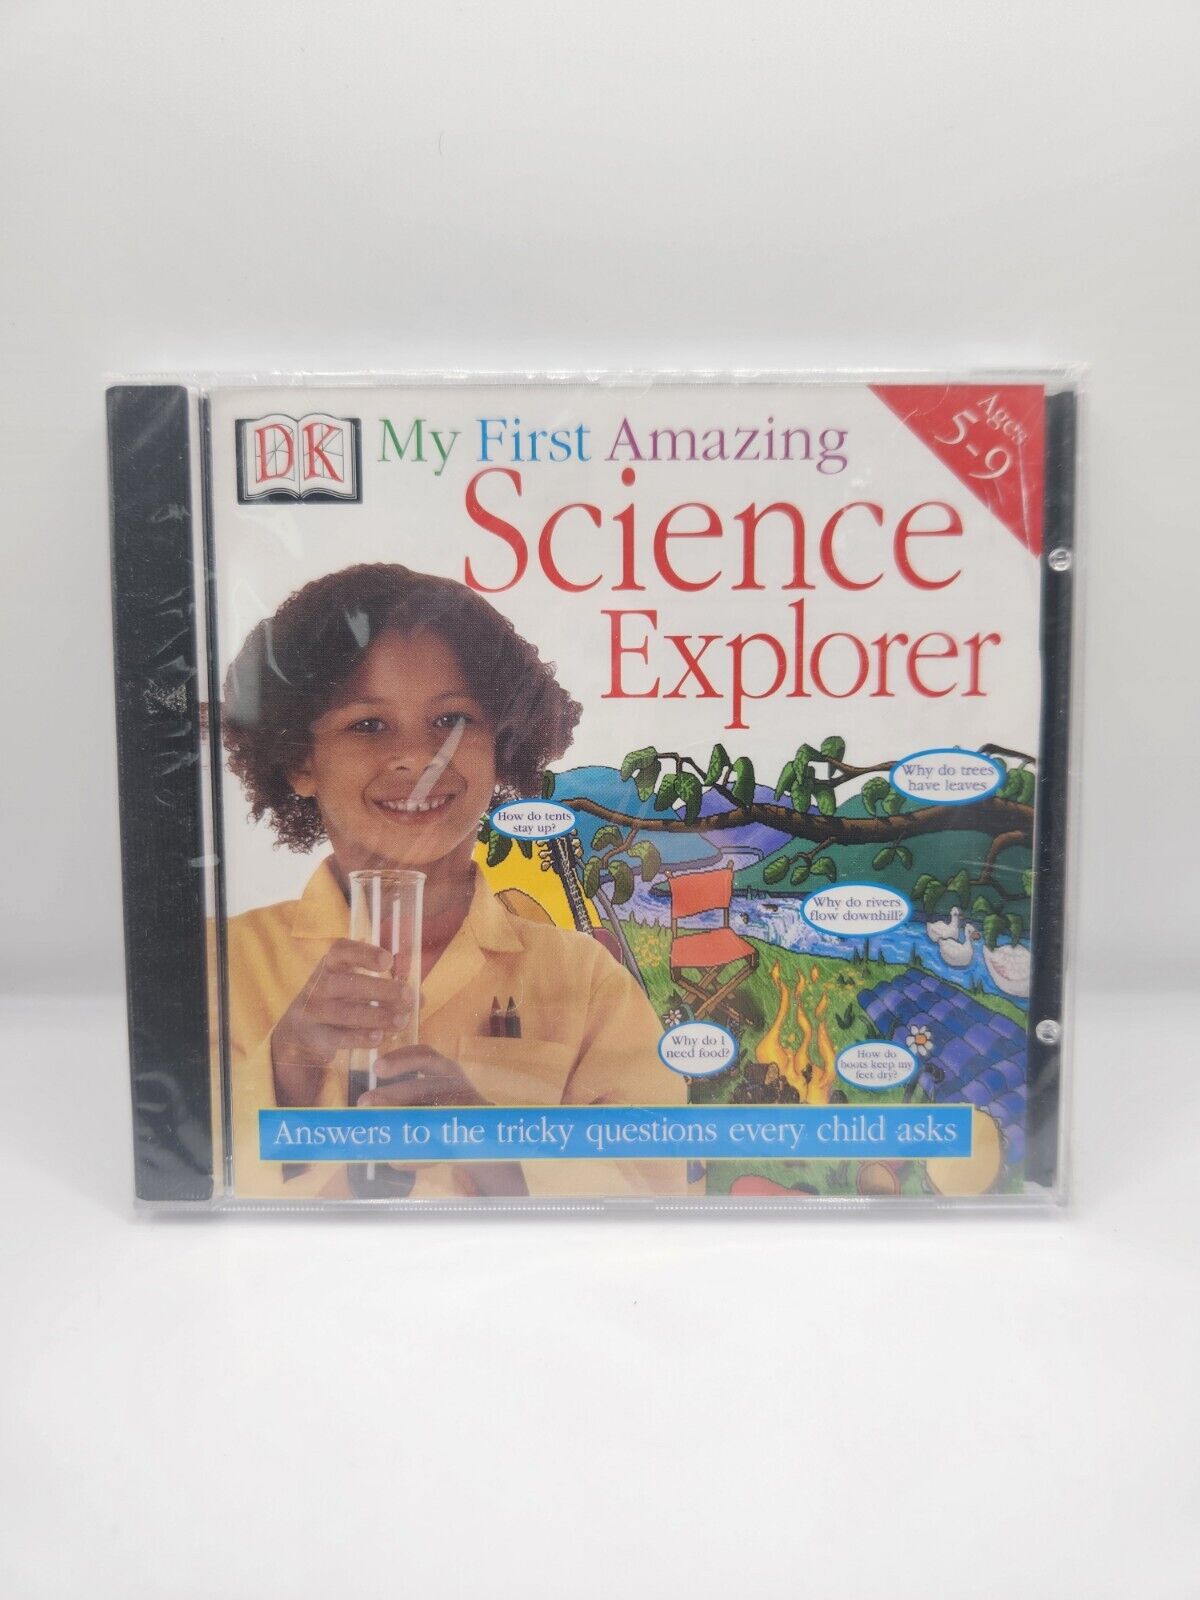 DK My First Amazing Science Explorer PC CD-Rom (1999) Ages 5-9